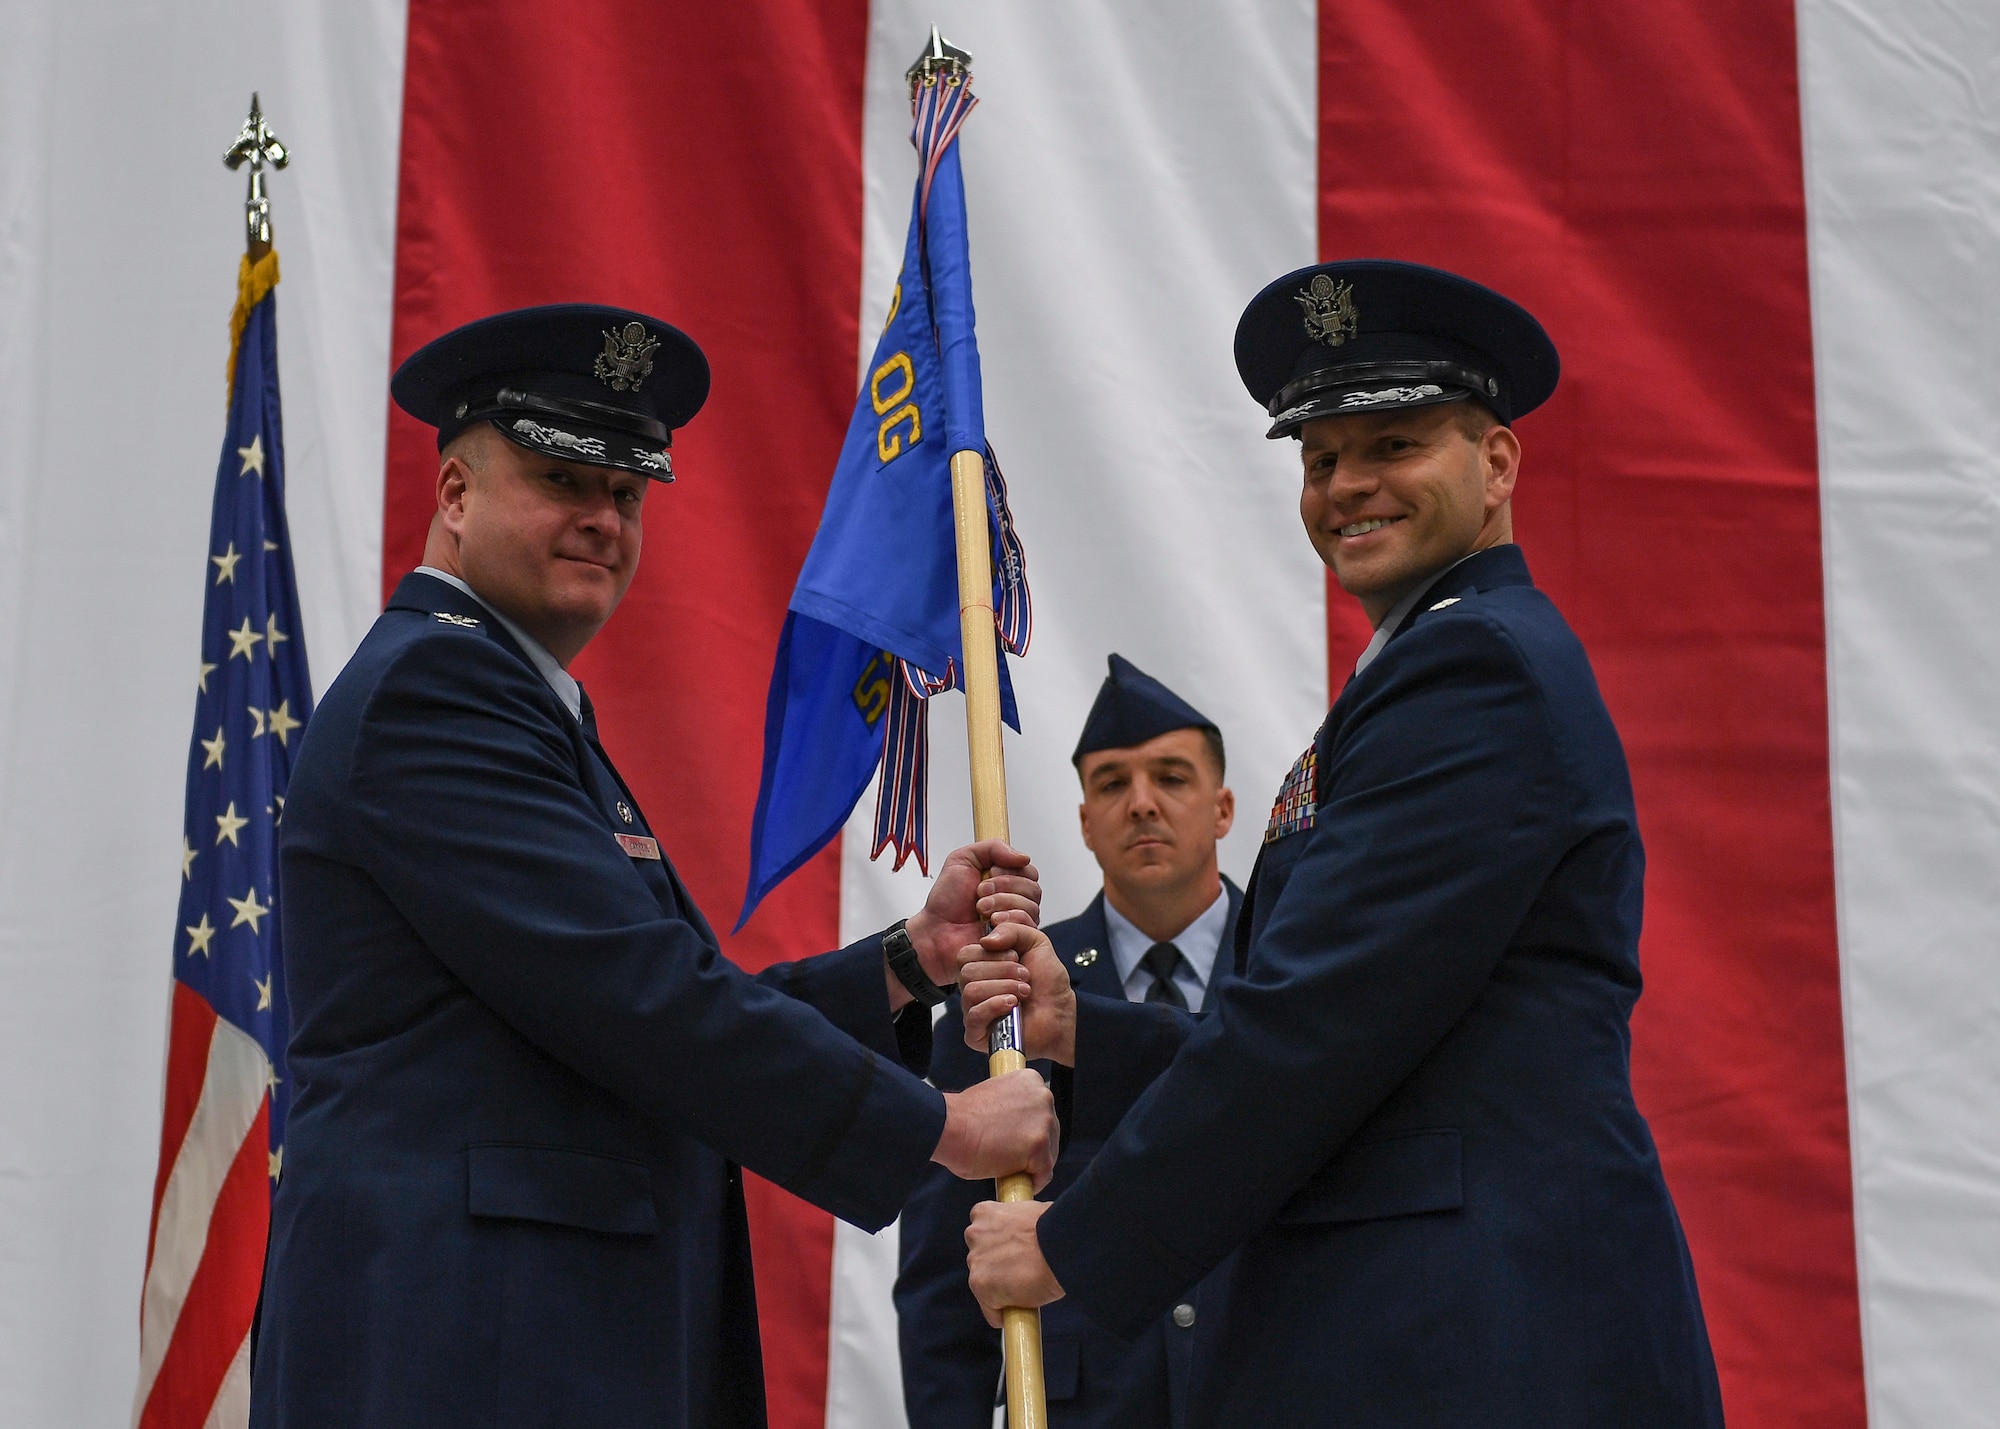 Passing of squadron flag during a change of command ceremony.